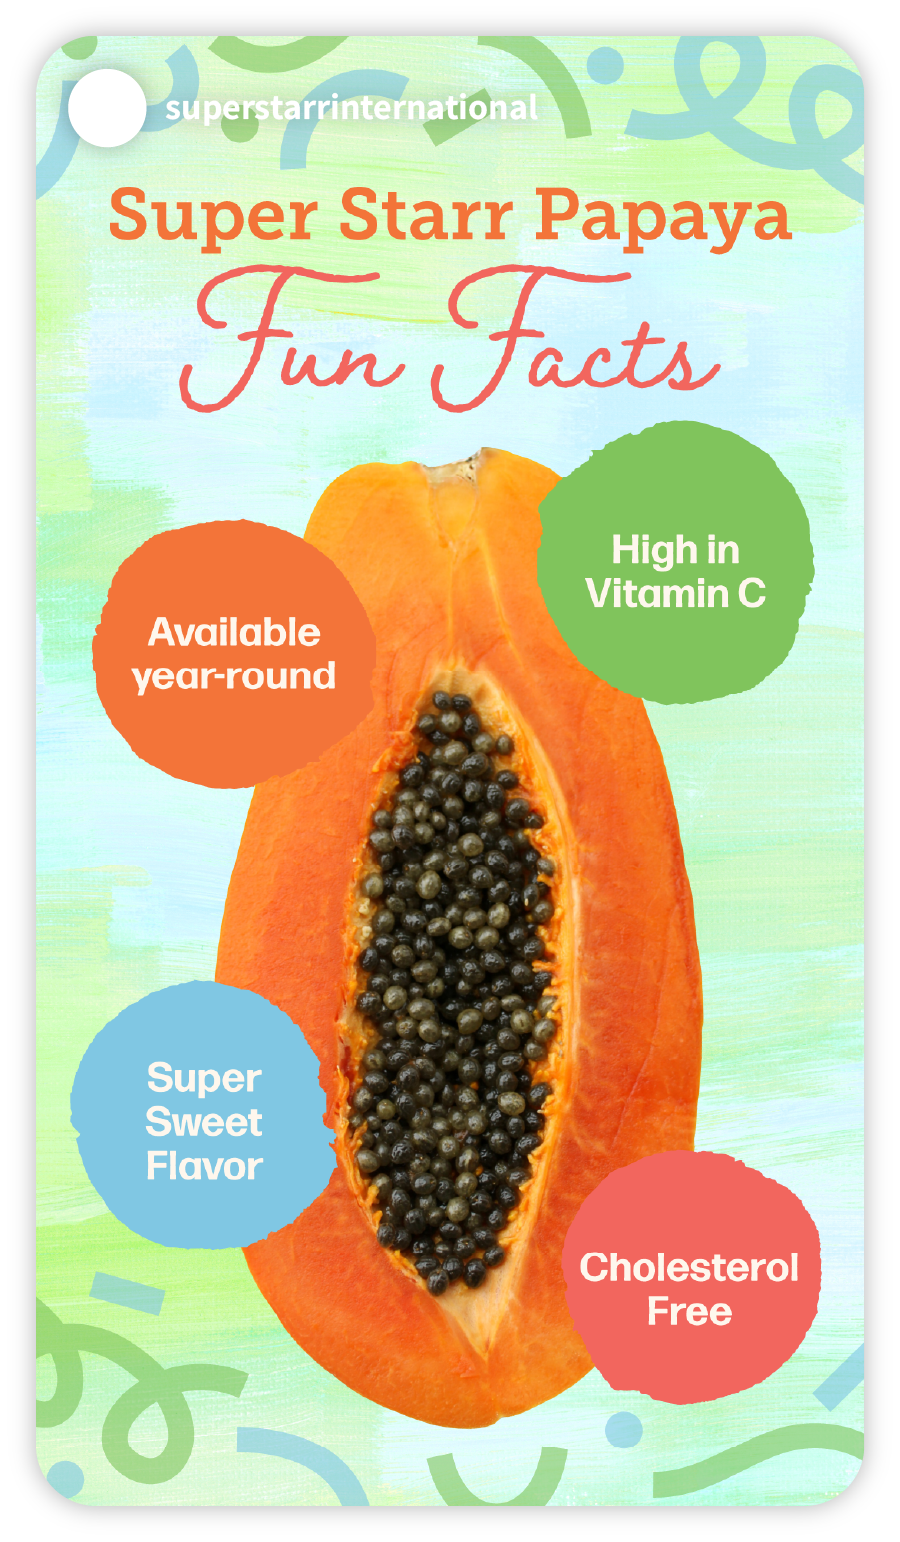 Example of a Super Starr Instagram story that says "Super Starr Papaya Fun Facts" with an image of a cut papaya